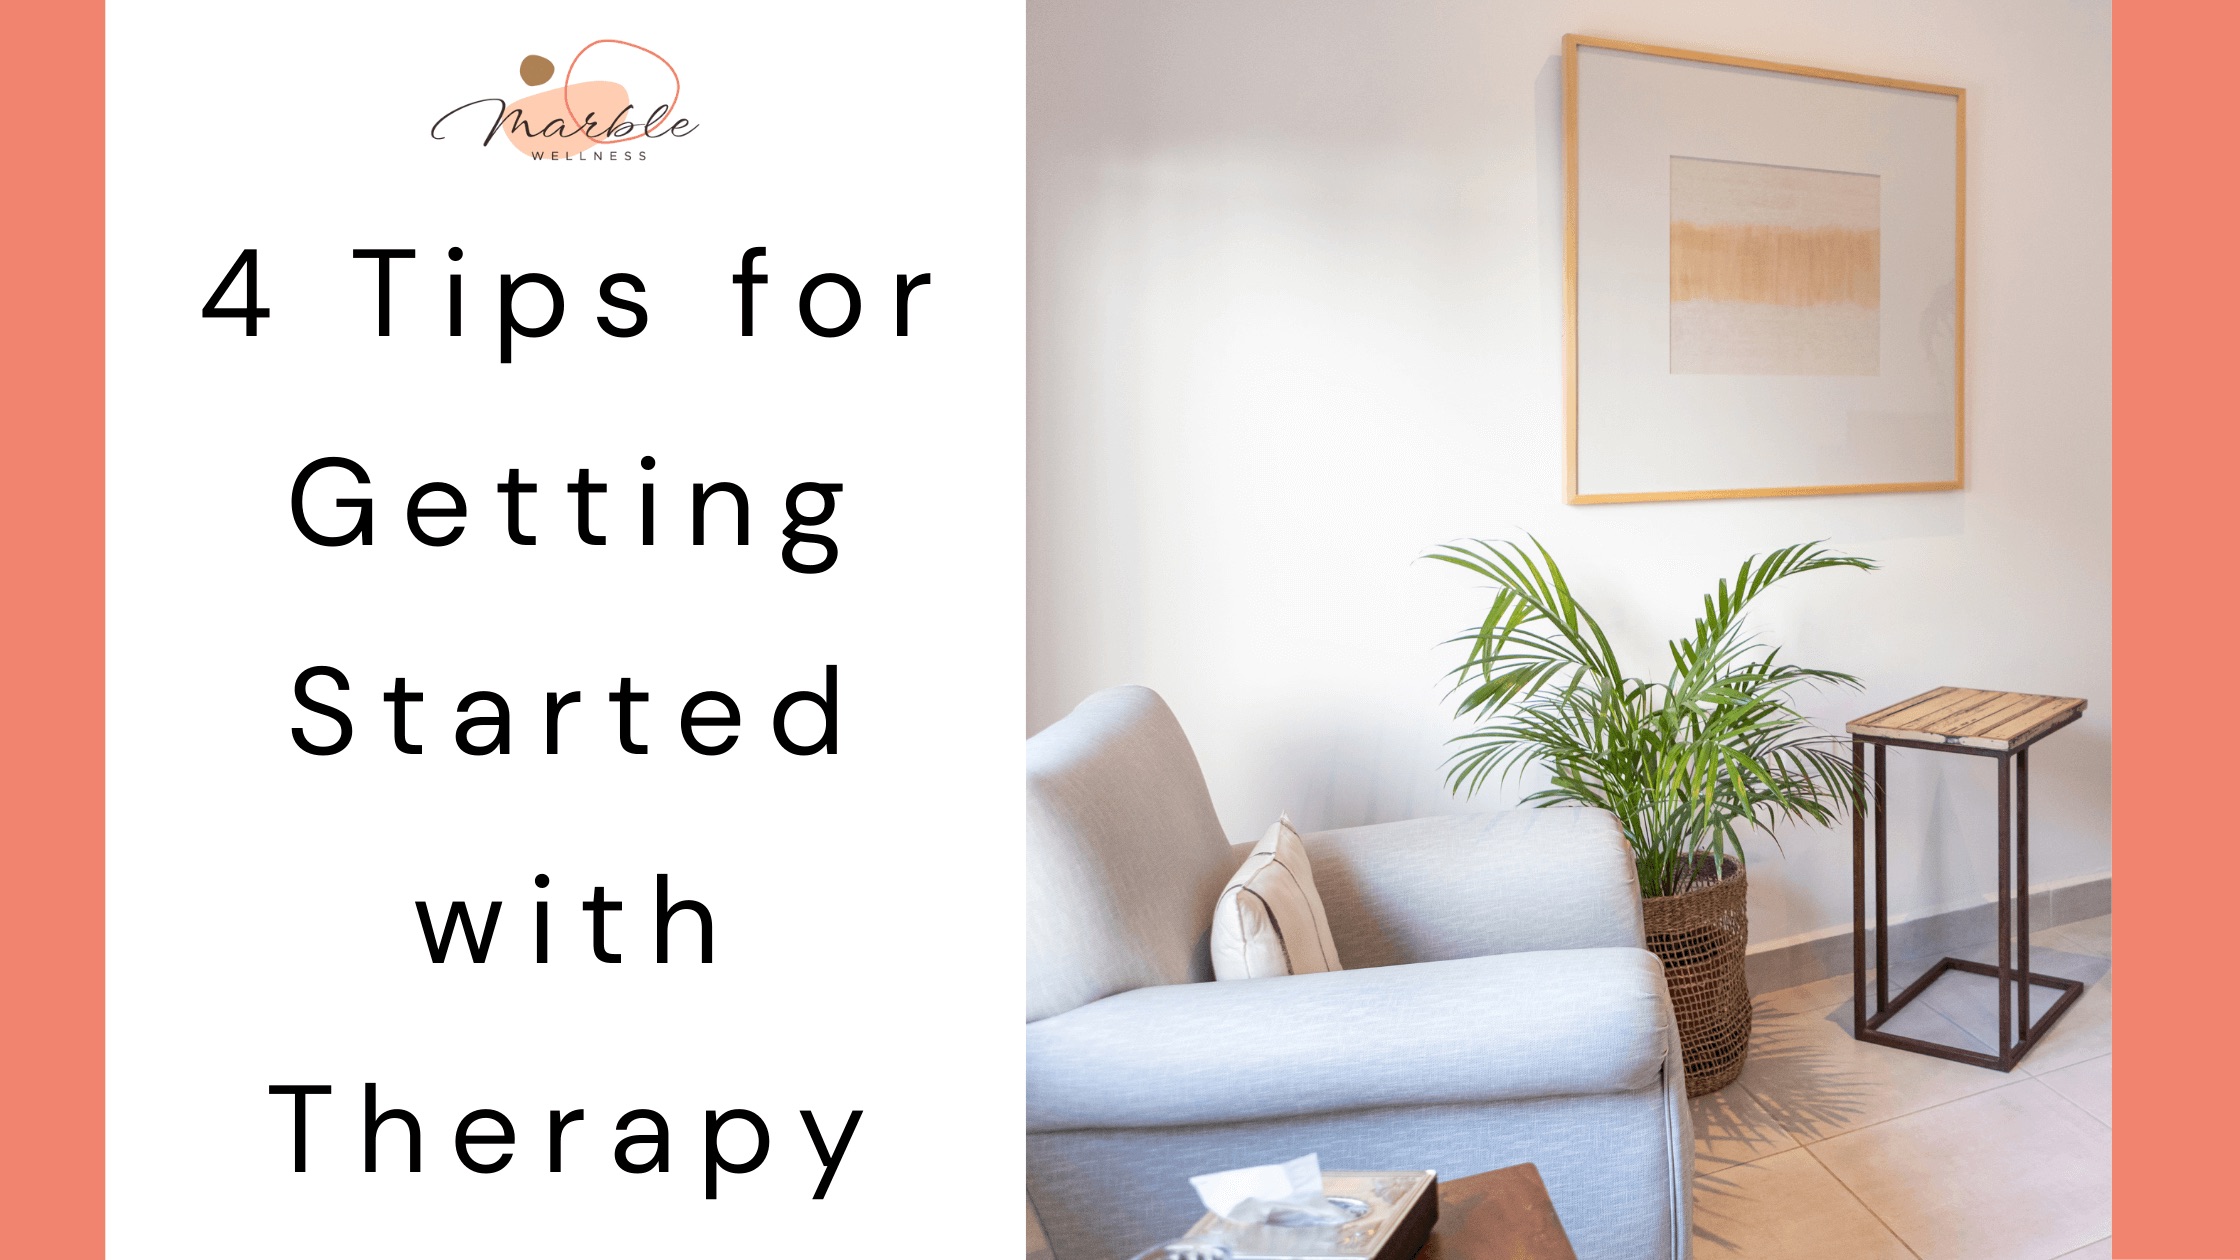 Cover photo for blog post "4 Tips for Getting Started with Therapy" in Chicago's West Loop. See an expert West Loop therapist for women, working moms, professionals, young adults, etc.